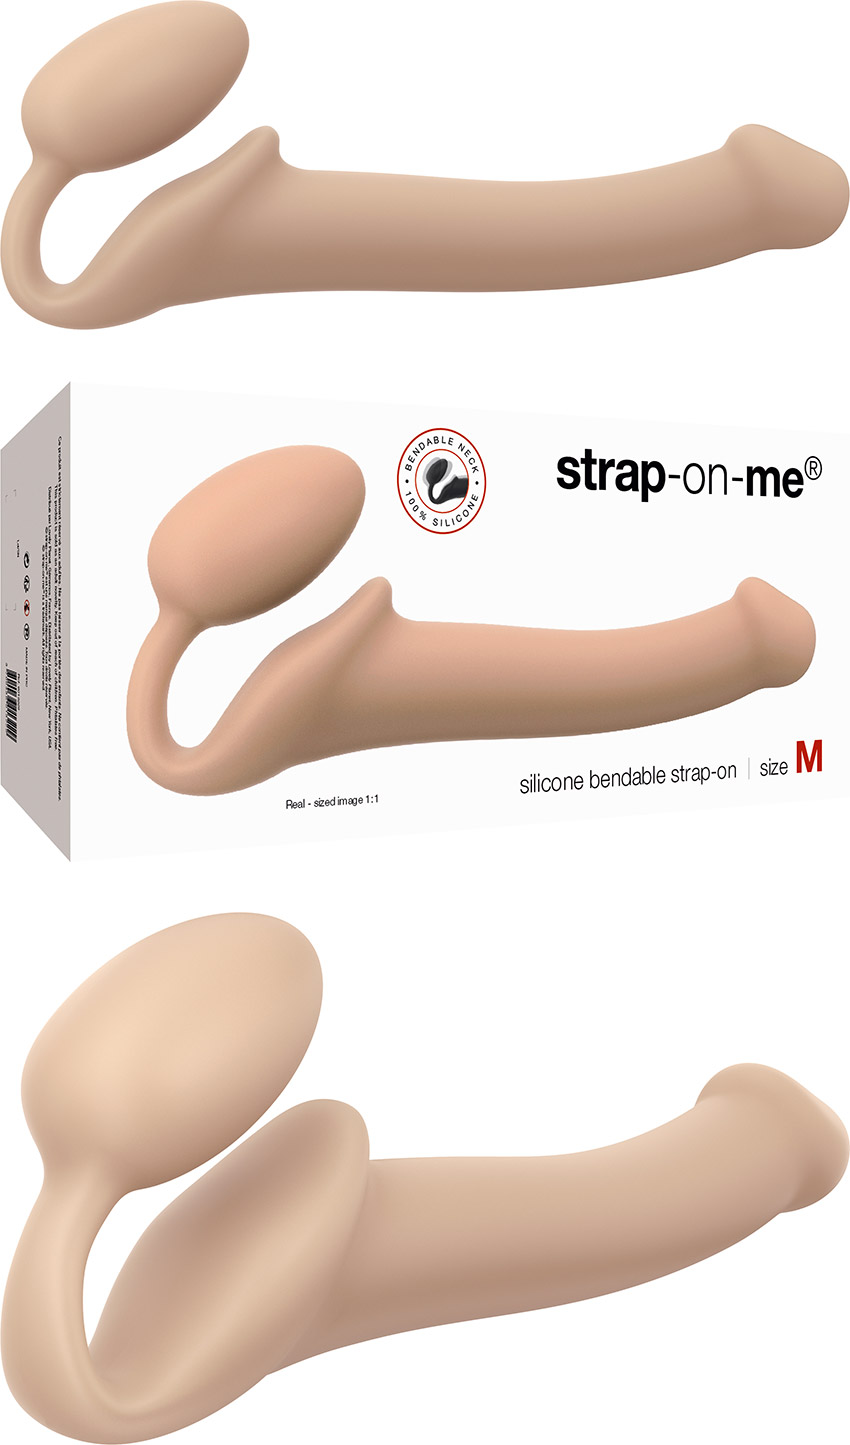 Double sextoy strap-on-me Bendable - Beige (M)